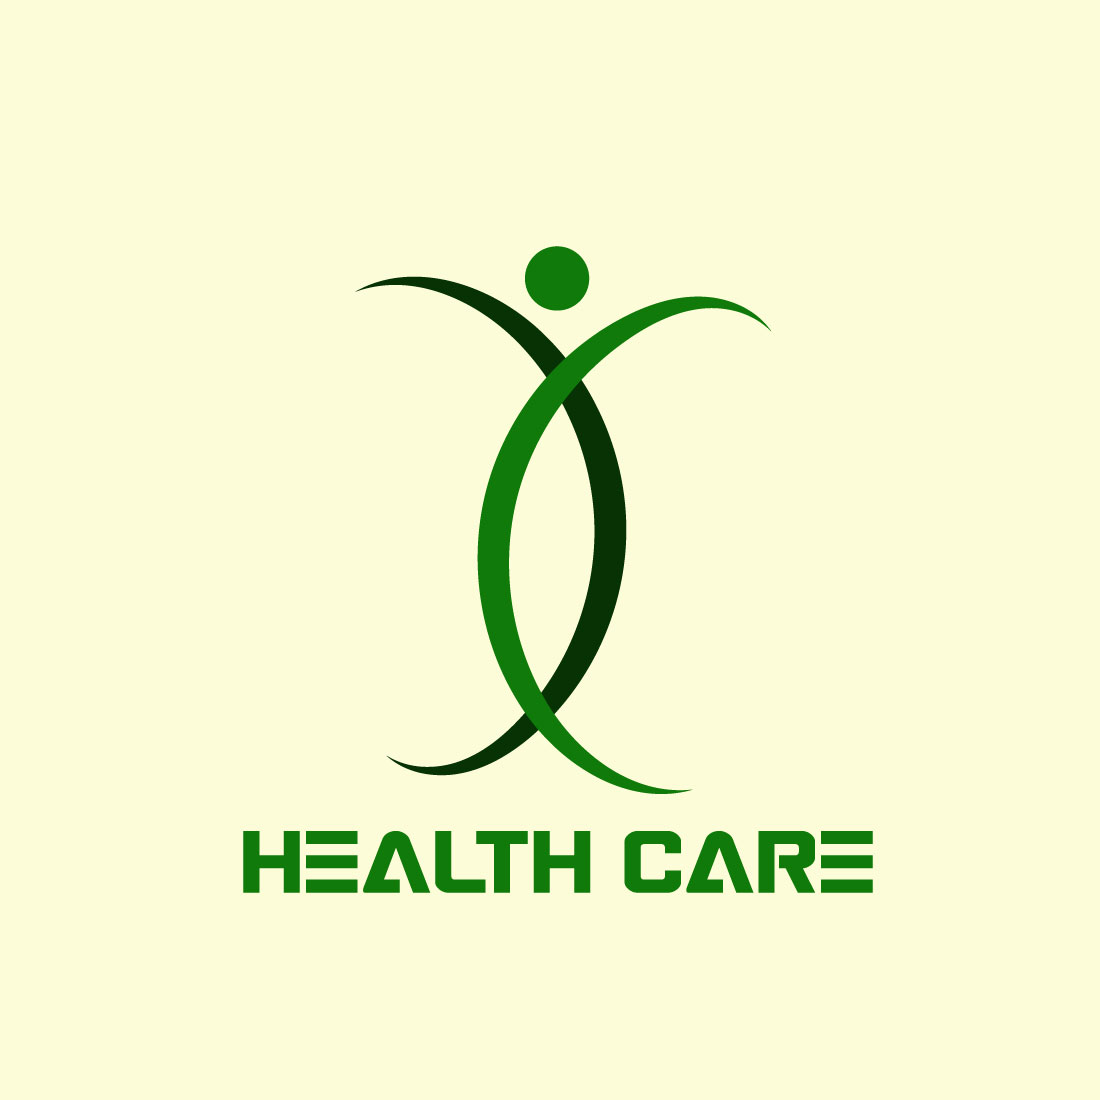 Free Empowering Health logo cover image.